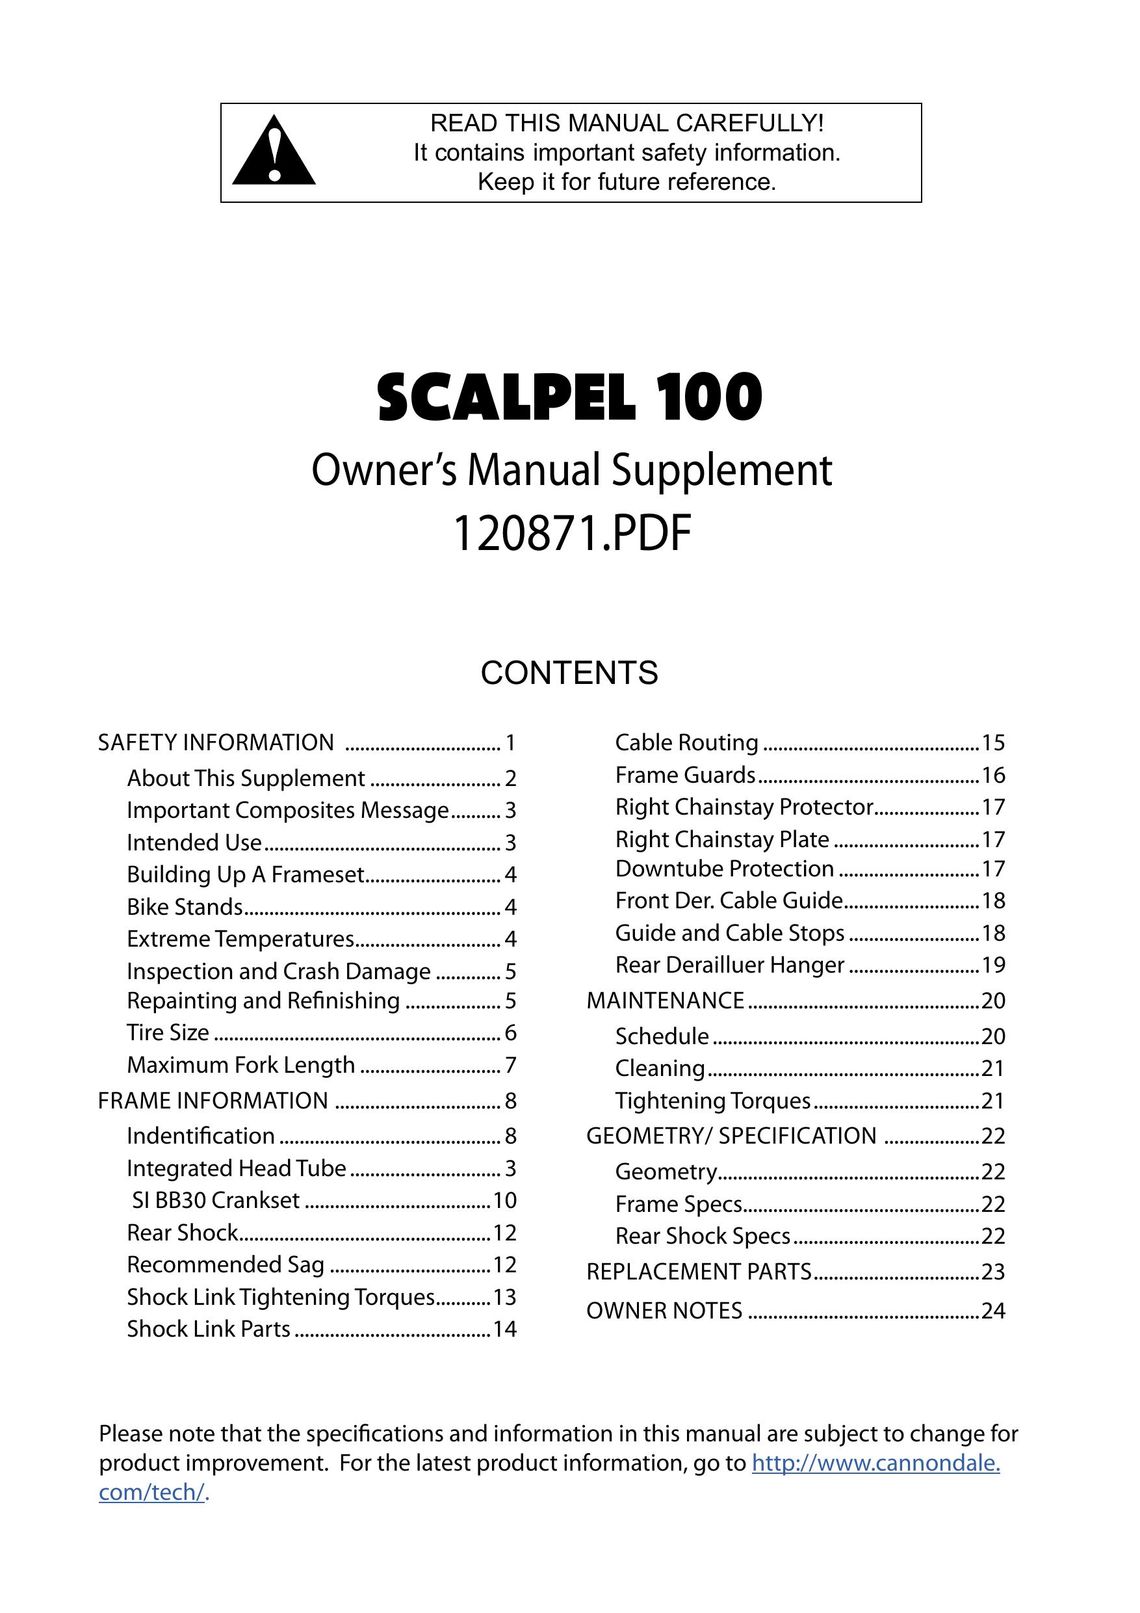 Cannondale SCALPEL 100 Bicycle User Manual